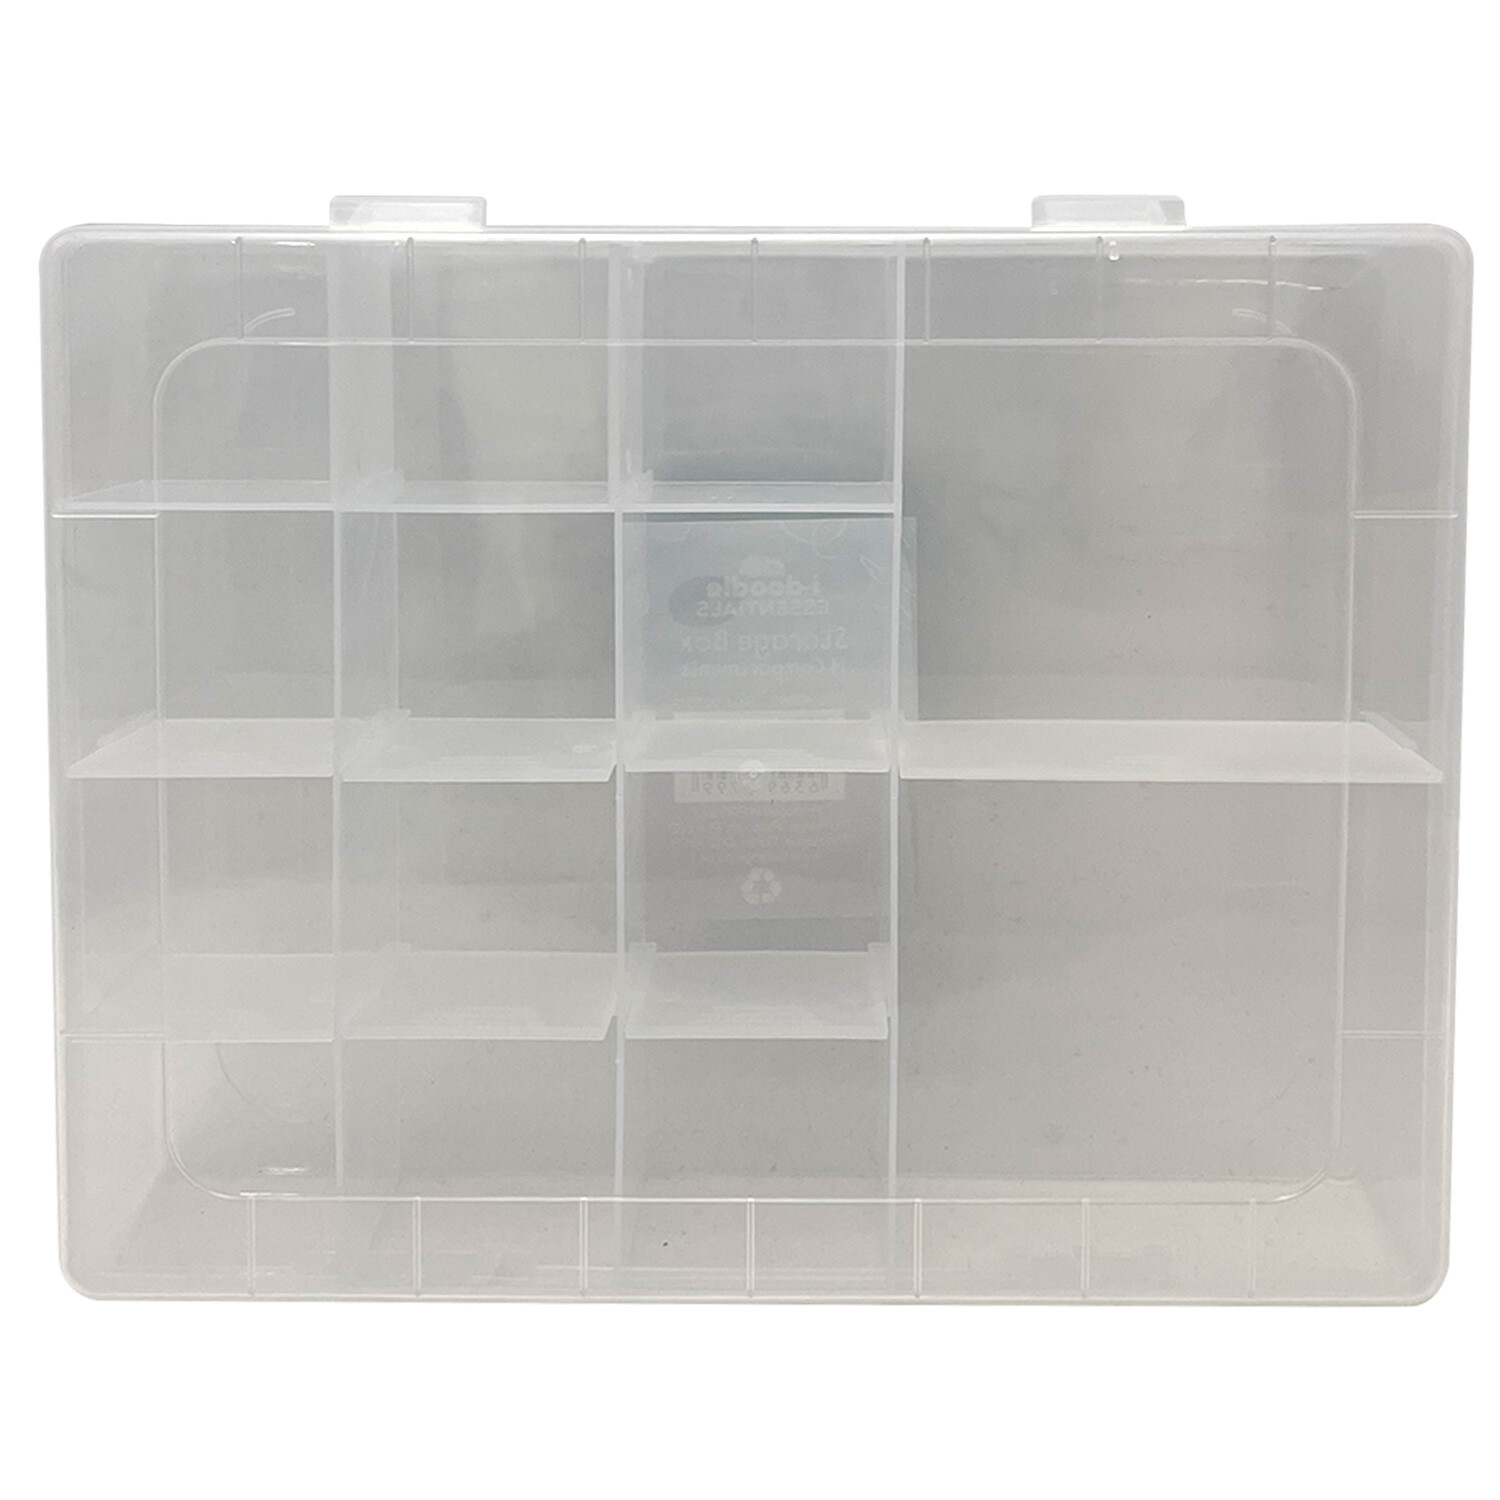 Compartment Storage Box - Clear / 14 Compartments Image 2